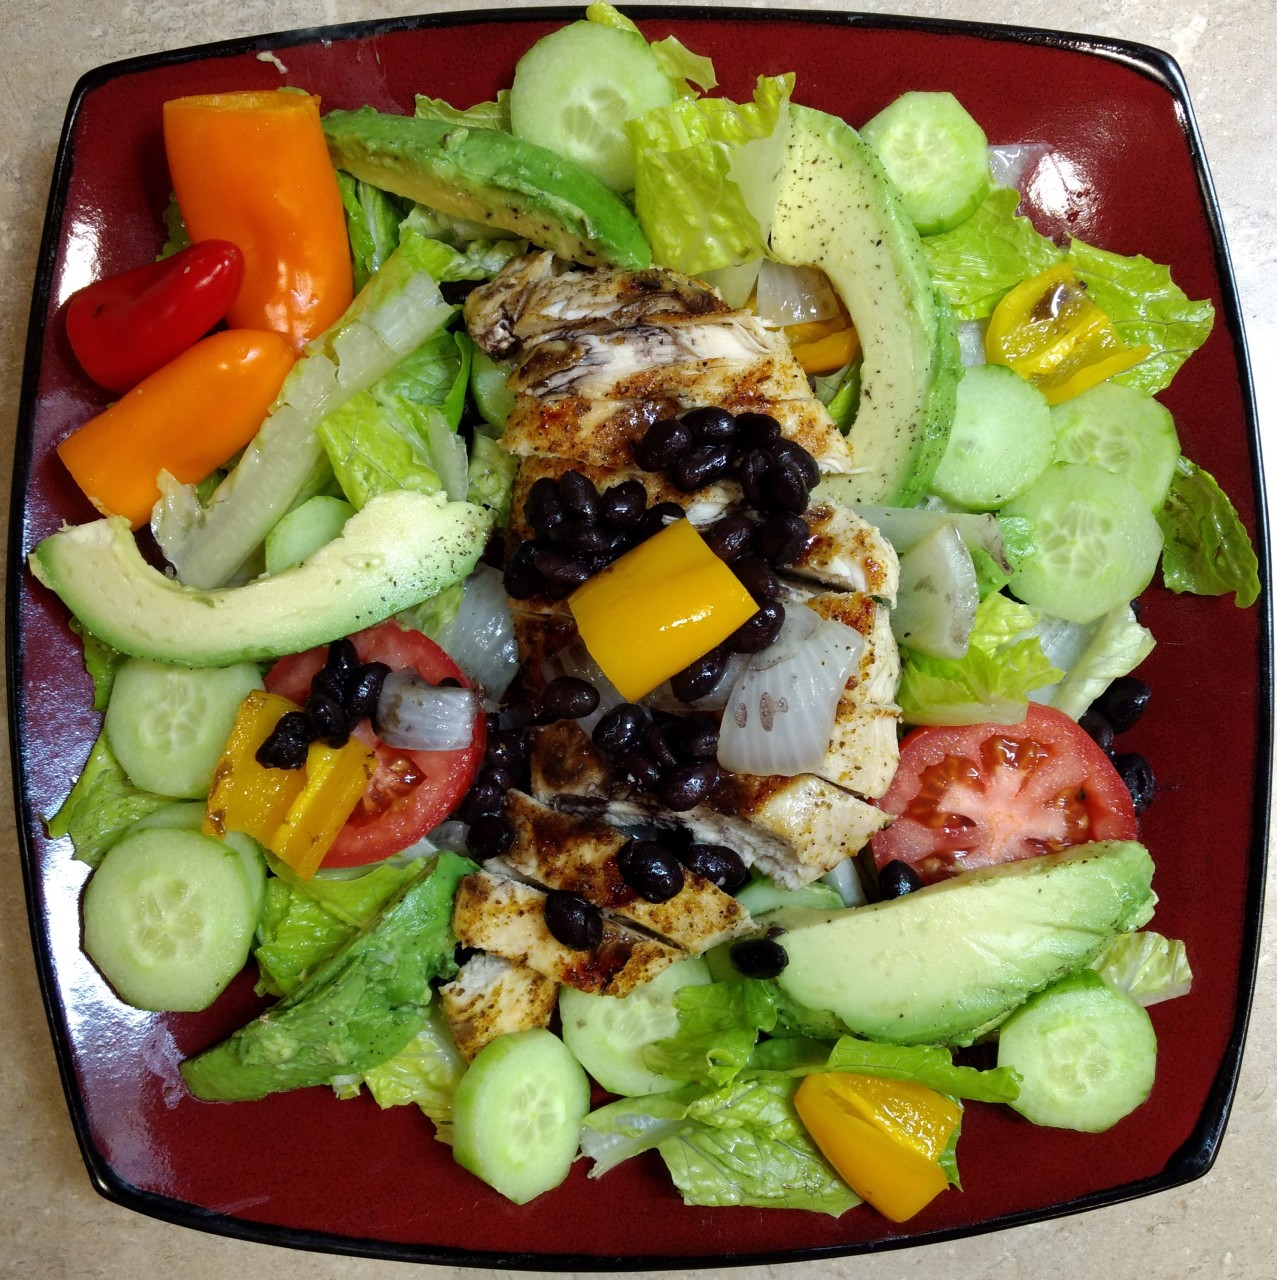 <a class="bx-tag" rel="tag" href="https://streetloc.com/view-channel-profile/whatsfordinner"><s>#</s><b>whatsfordinner</b></a> Grilled Chicken with Black Bean Salad with Avocado, Sweet Peppers, Cucumber and Tomato